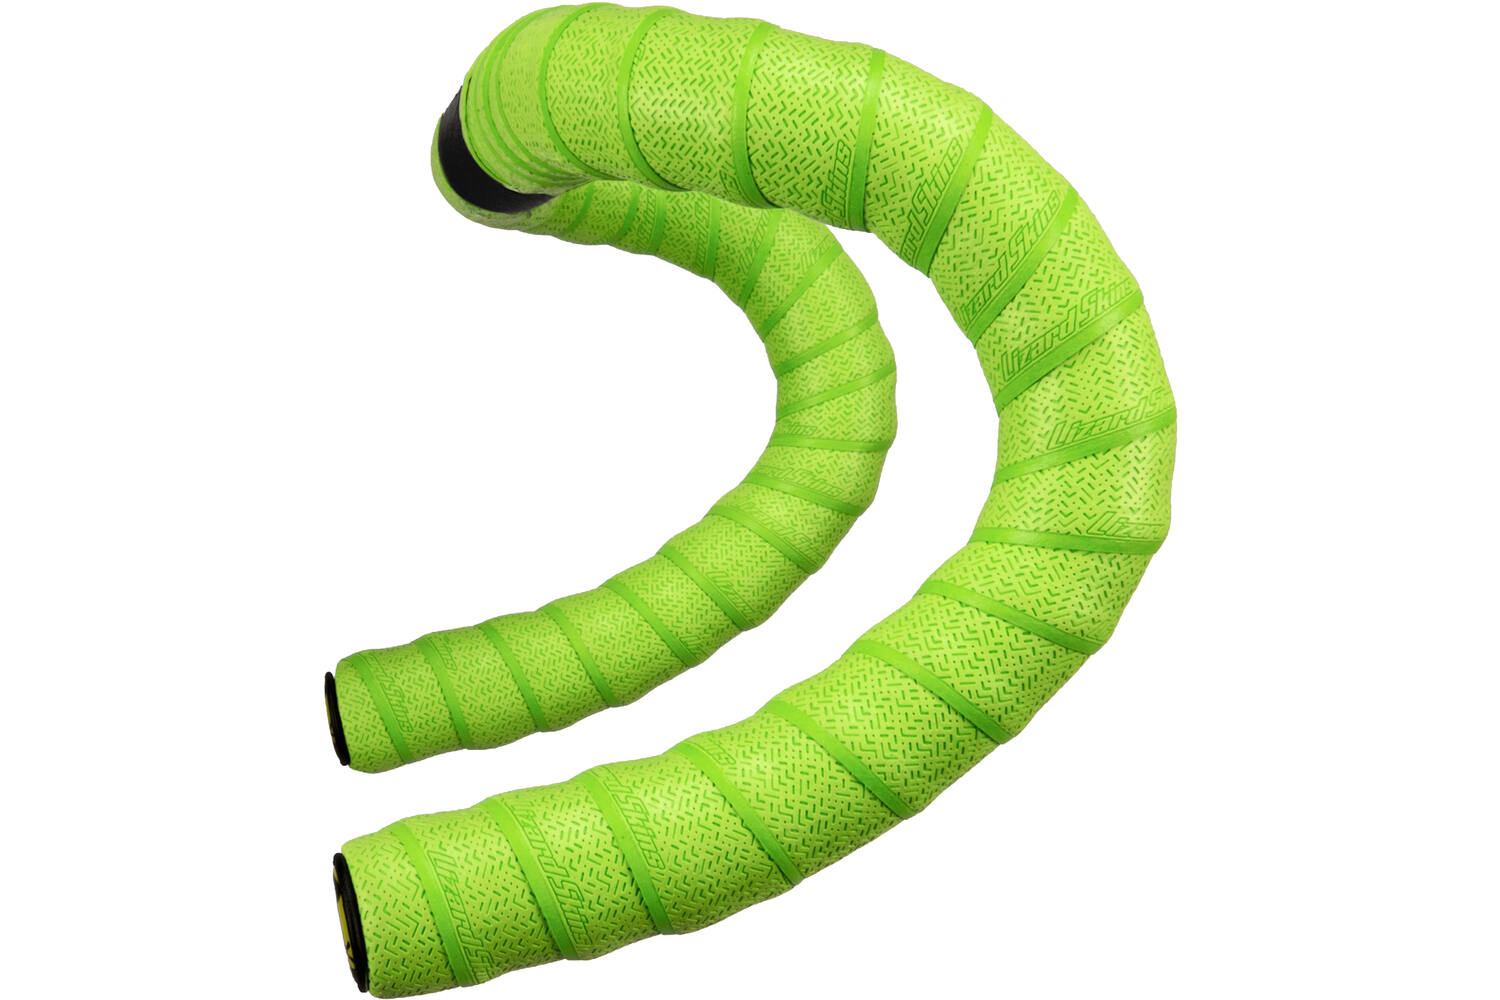 handlebar tape DSP V2 3.2 mm polymer green 2 pieces